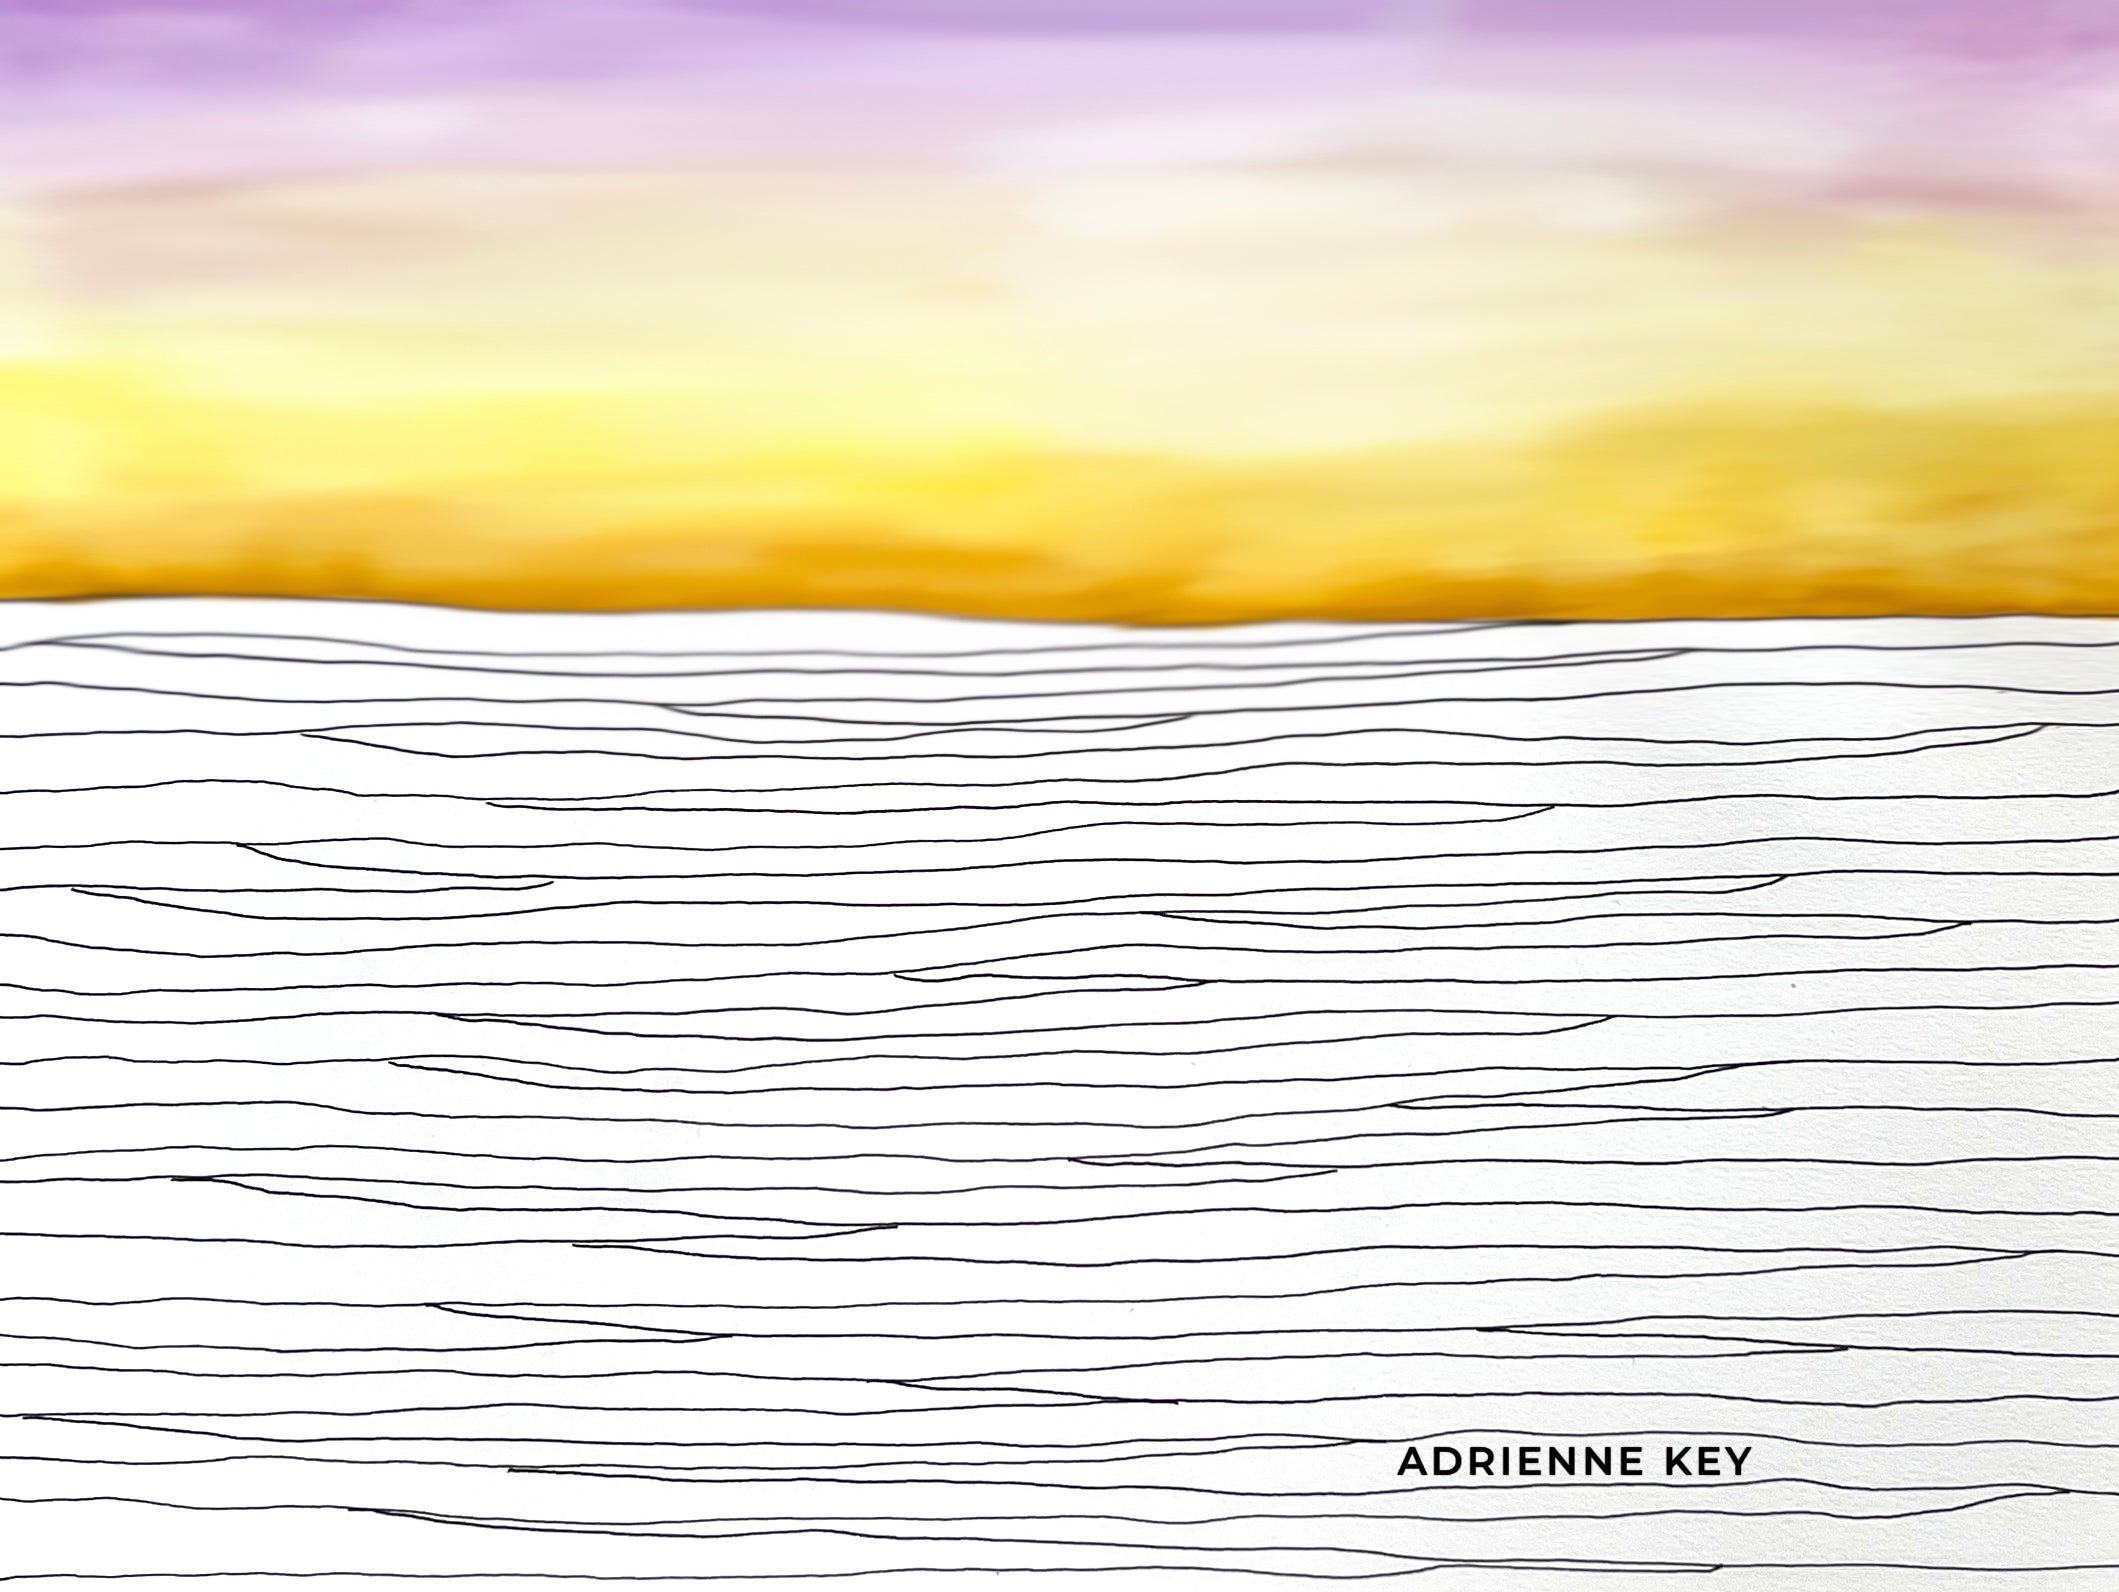 9x12 inch art drawing on paper using ink and watercolor to create abstract concentric horizontal lines and sunset